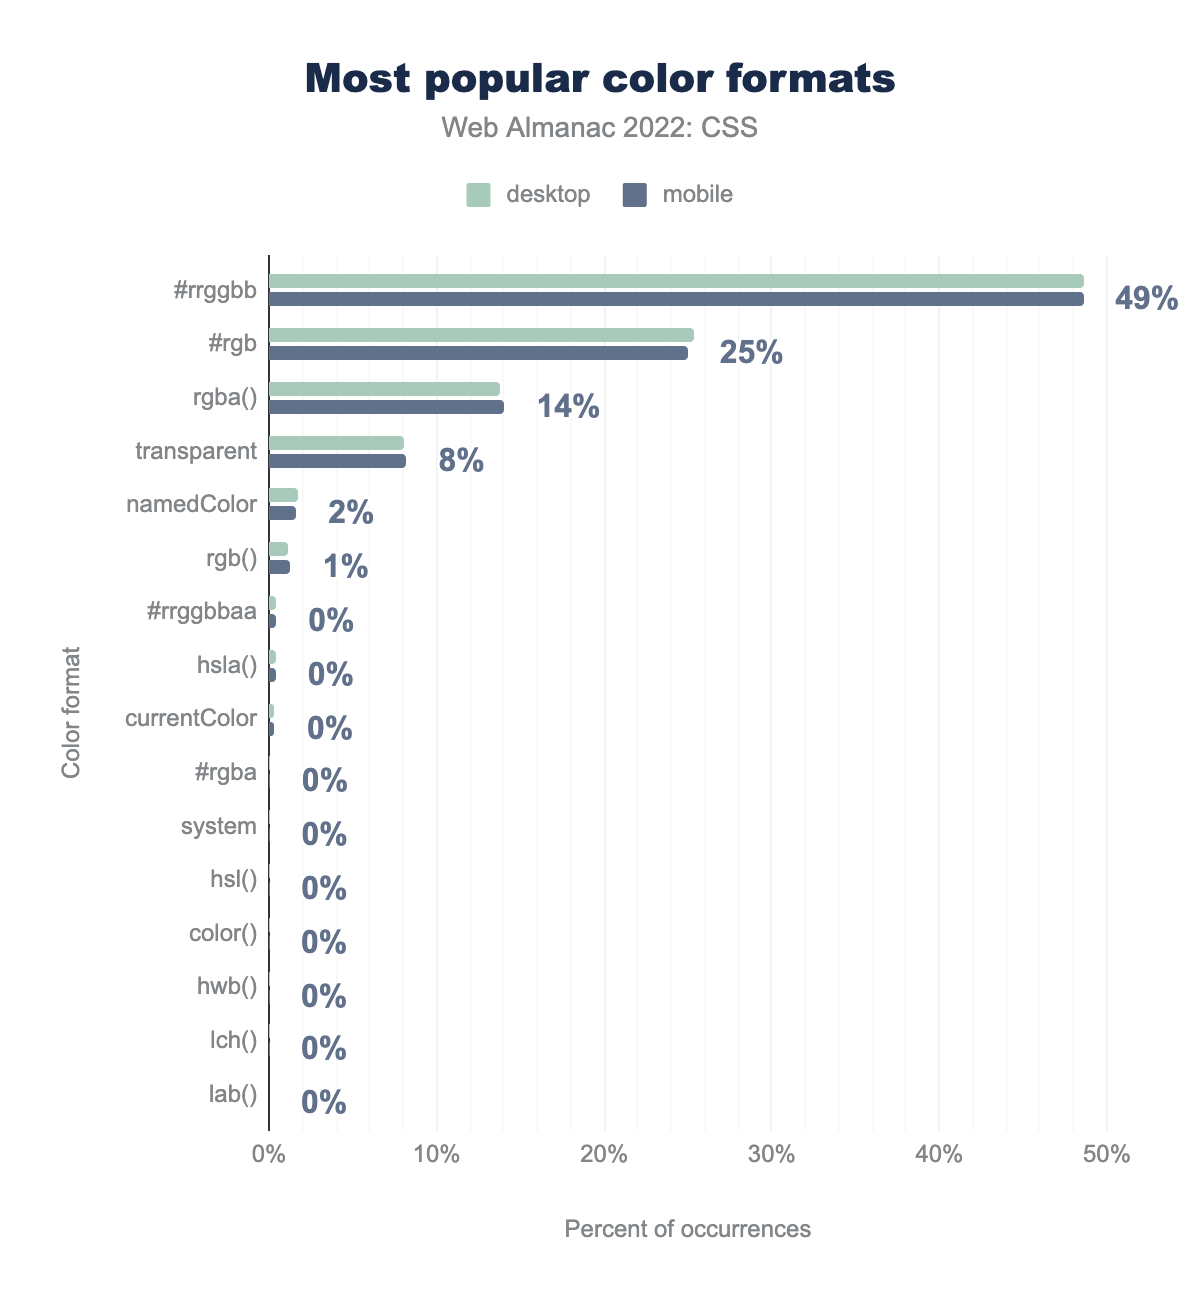 The most popular color formats by percent of occurrences.